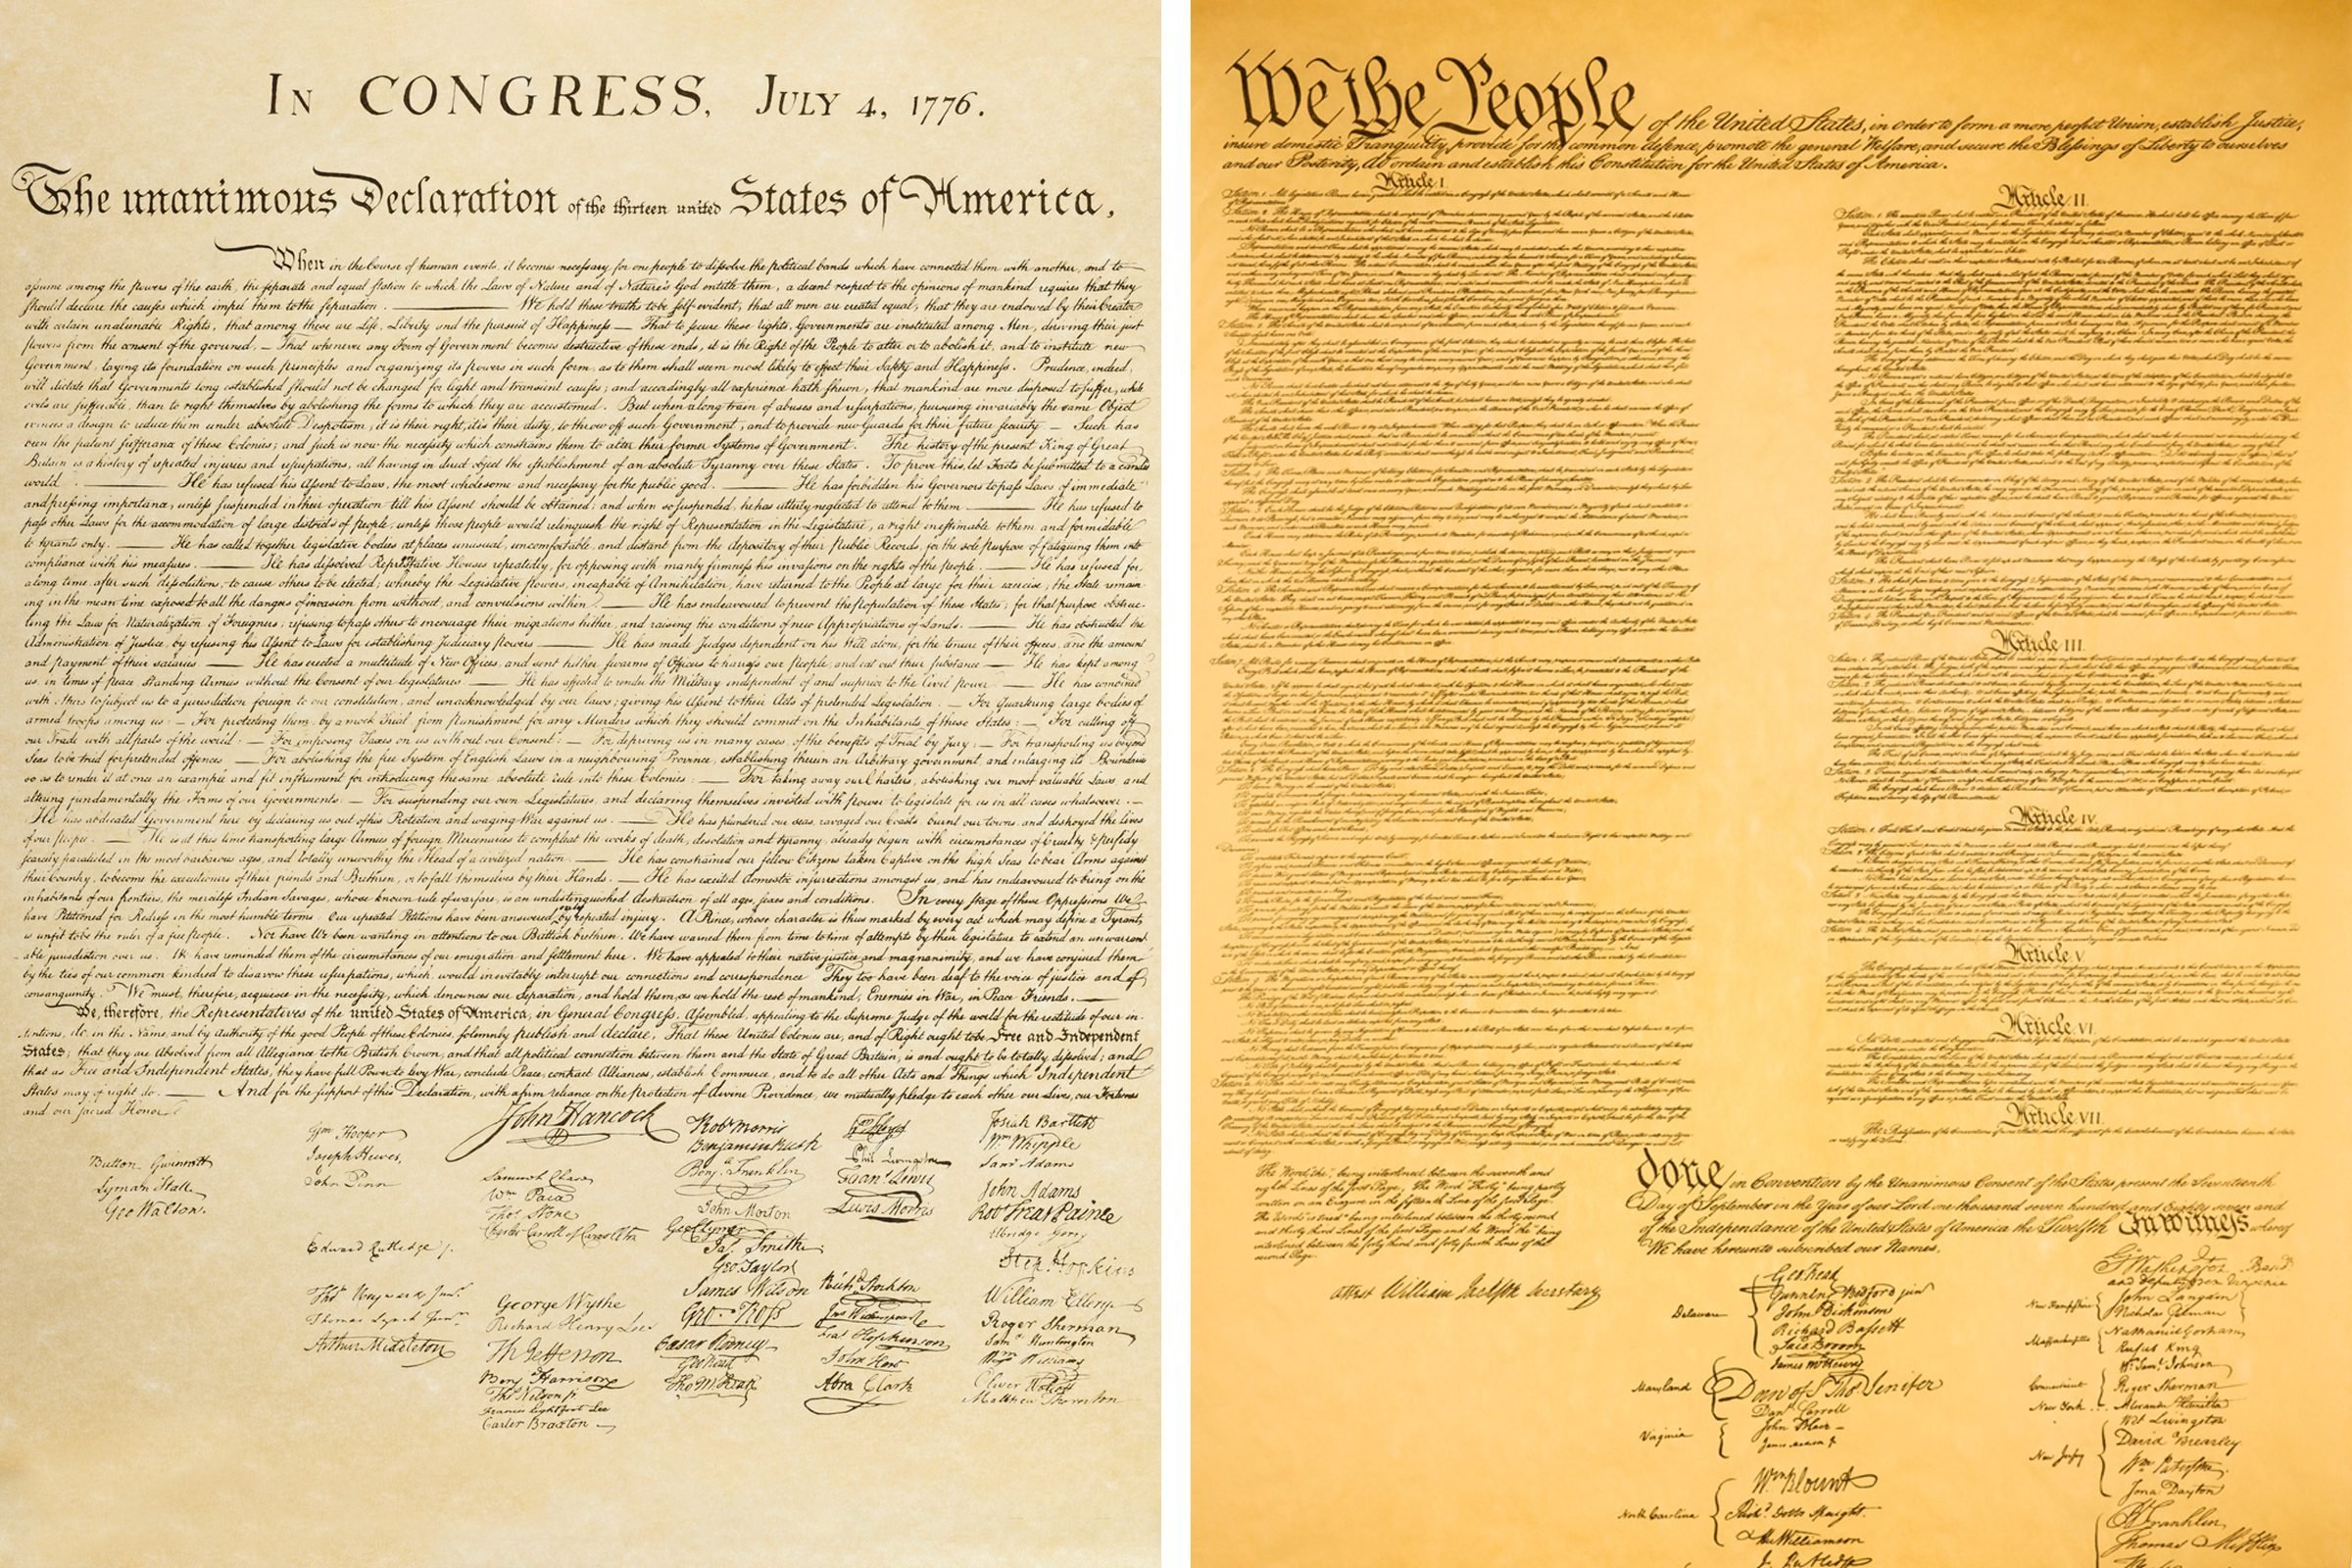 When Did America Gain Independence? - Constitution of the United